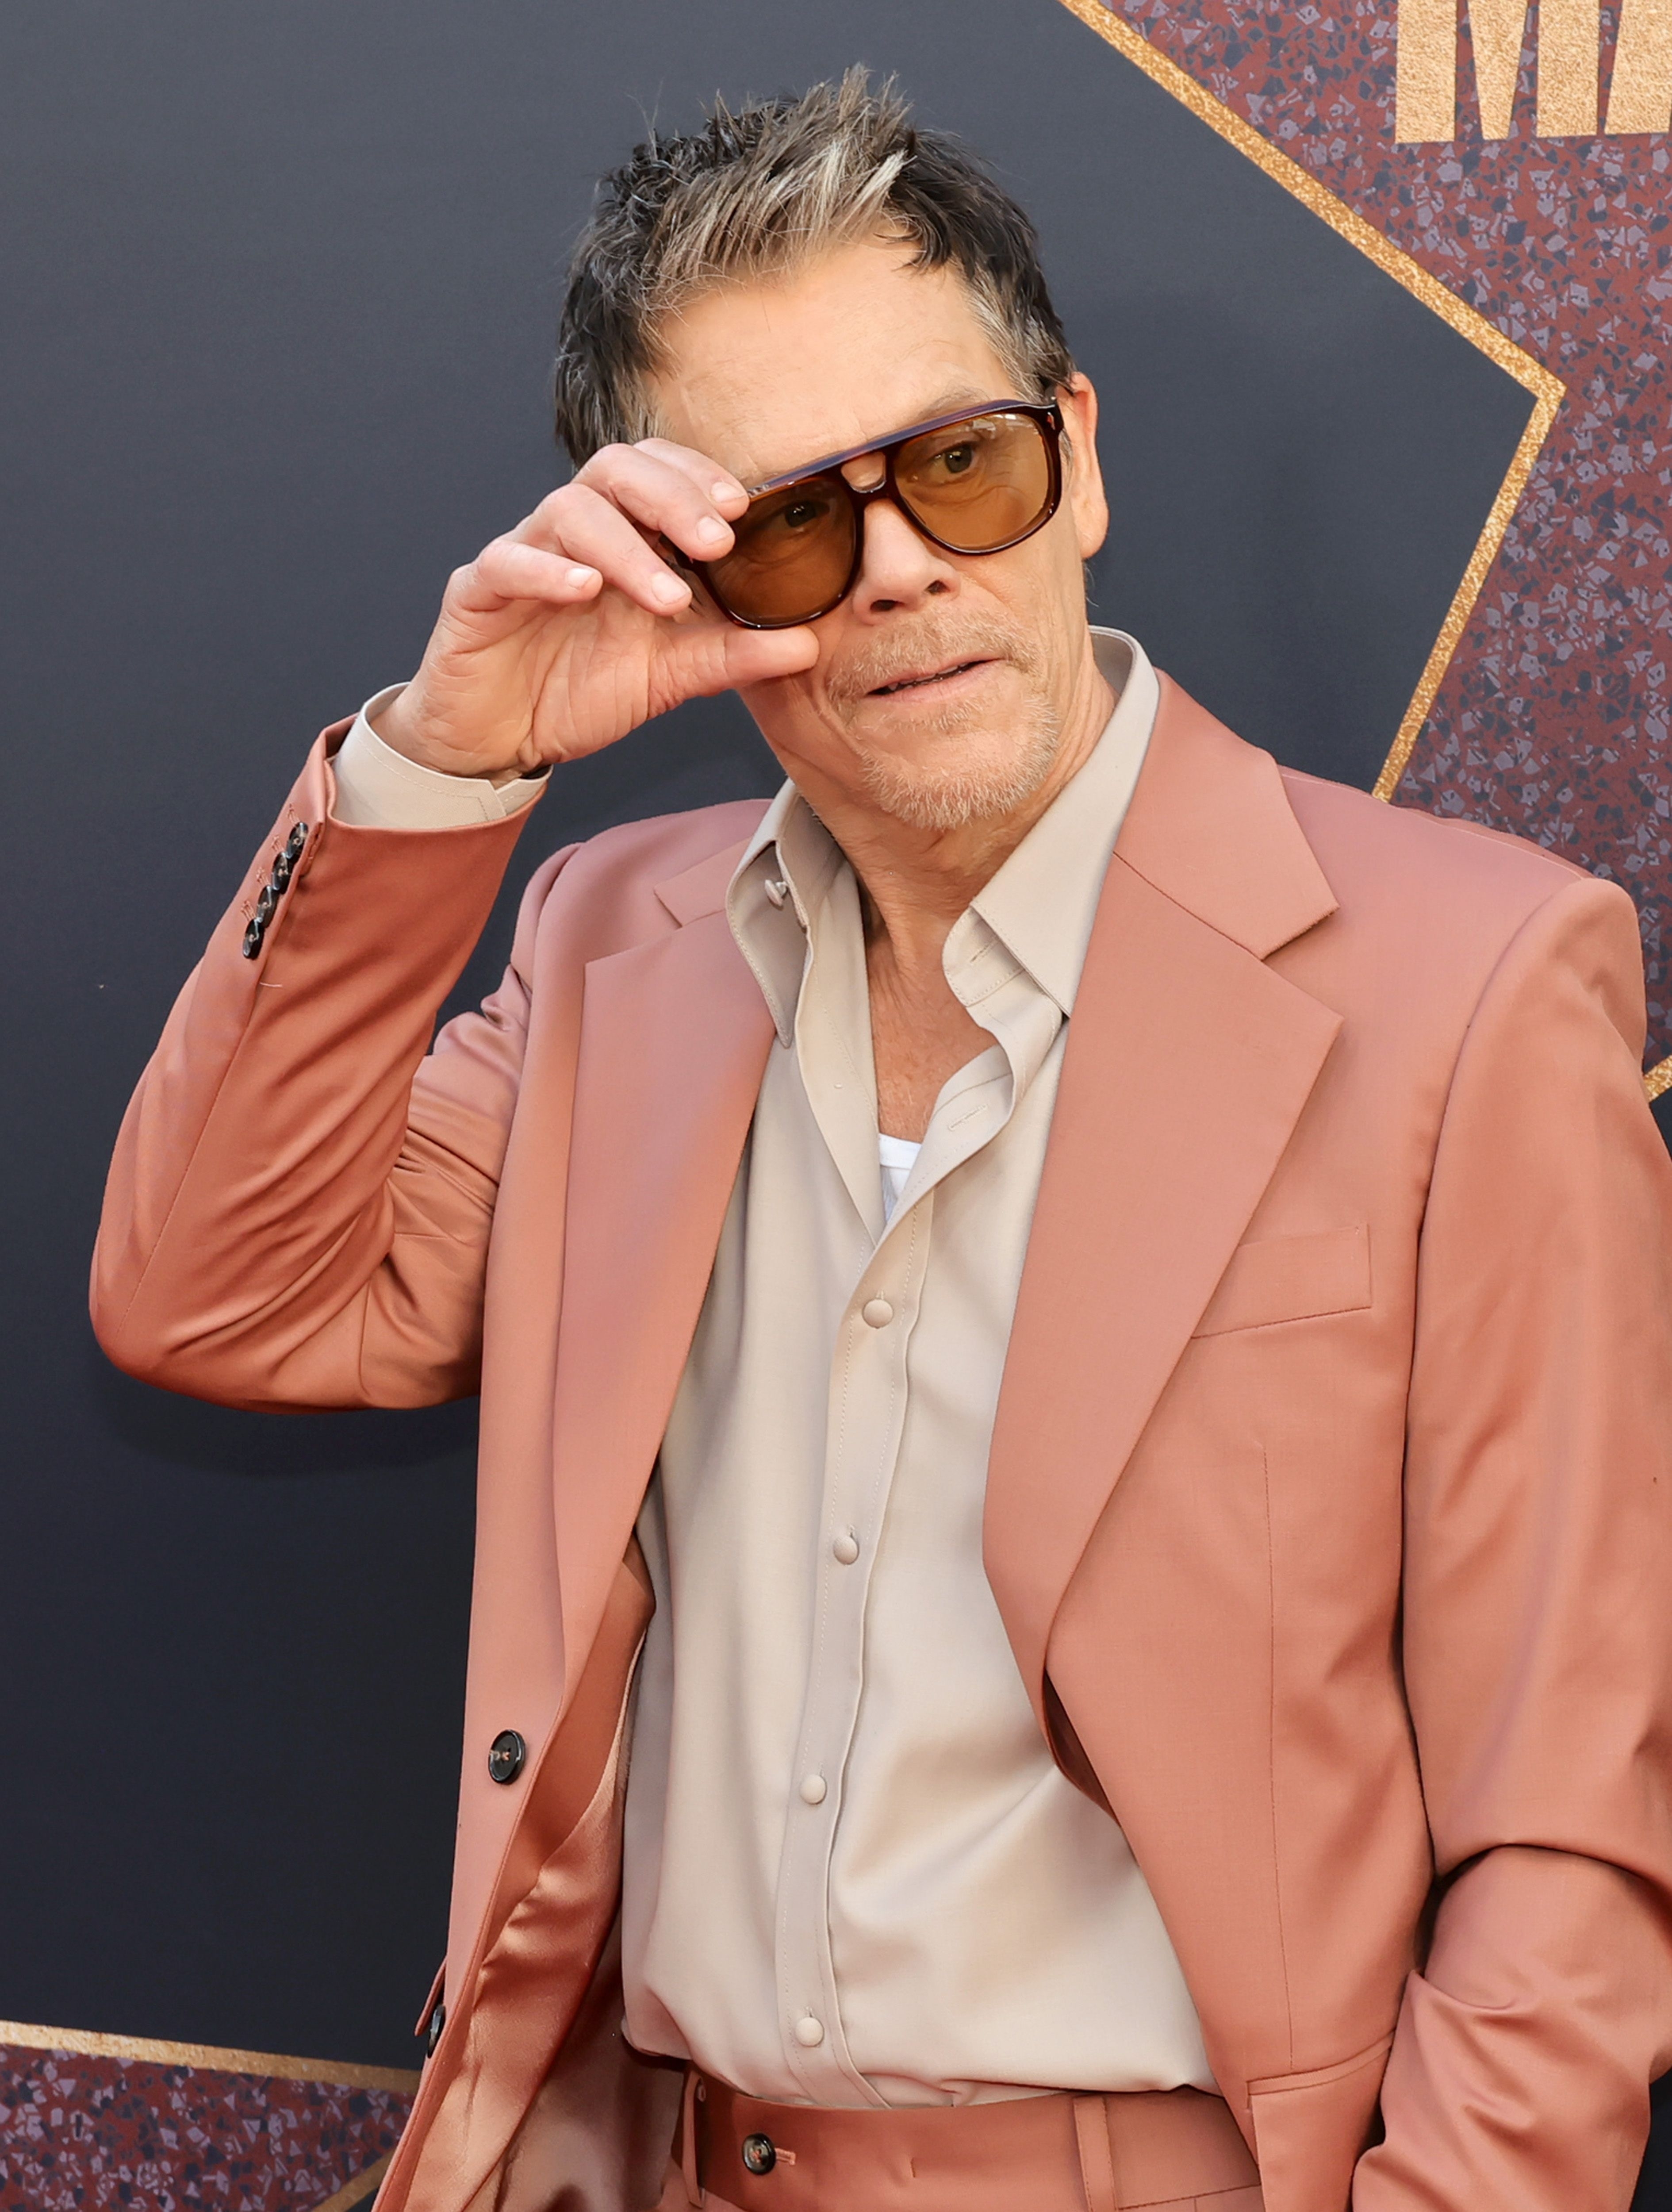 Kevin Bacon on the red carpet, wearing a light beige shirt and a matching suit, with sunglasses